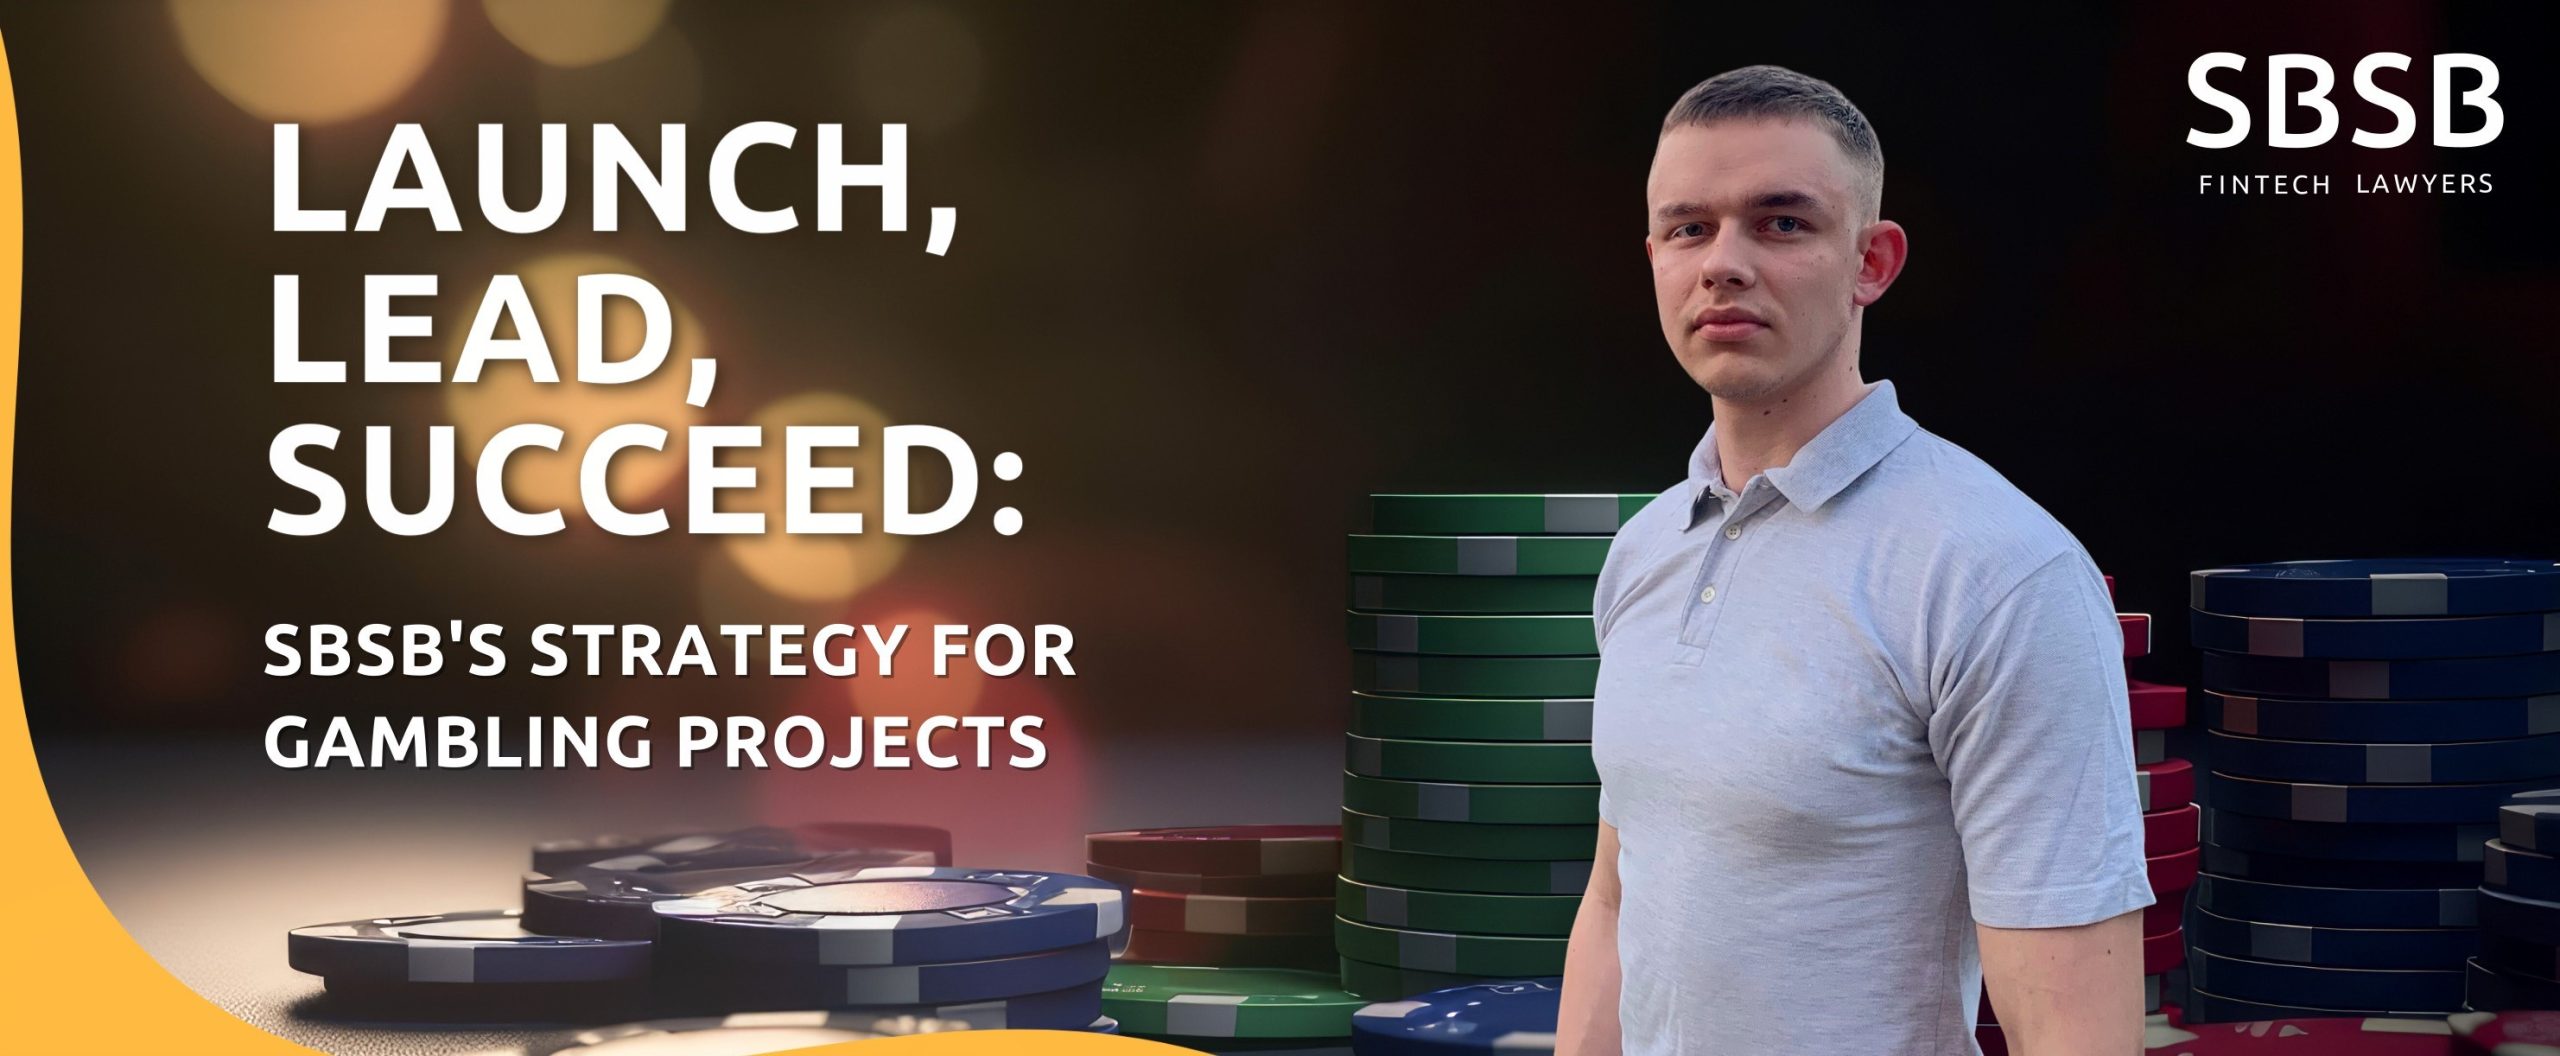 Launch, lead, succeed: SBSB's strategy for gambling projects